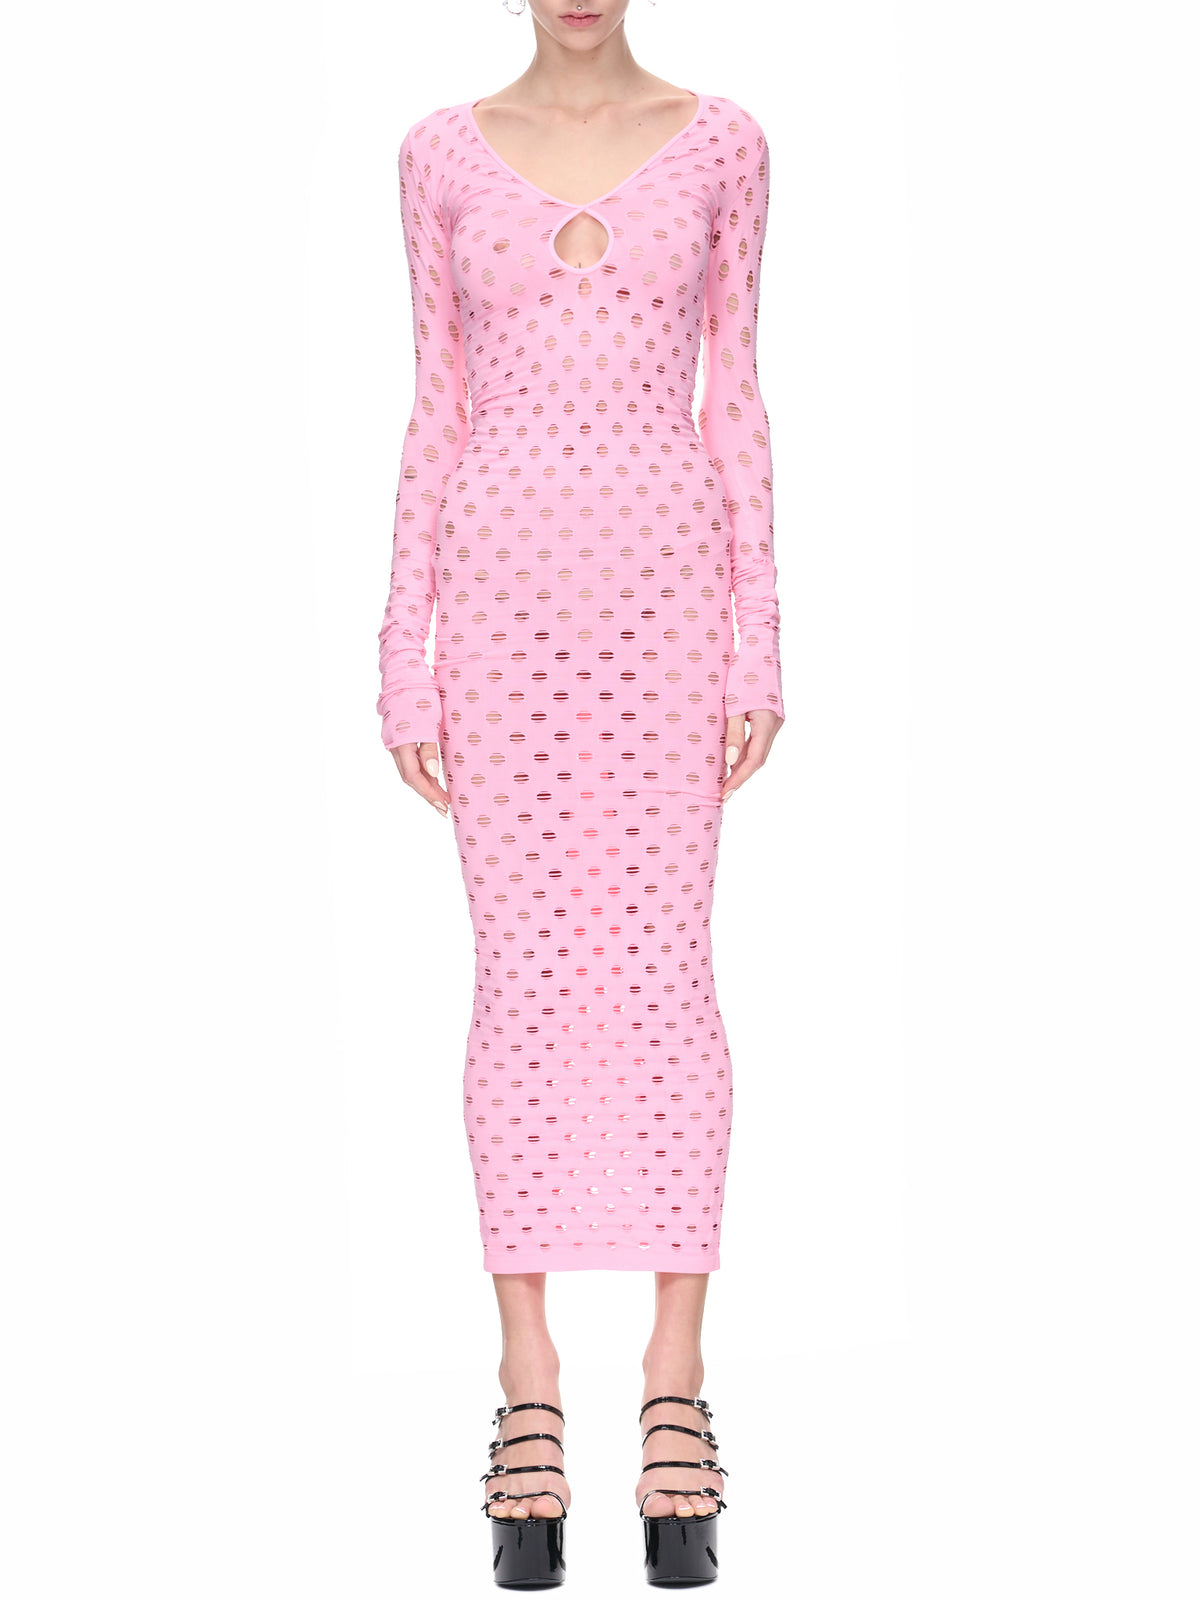 Perforated Dress (YS450-BABY-GIRL)